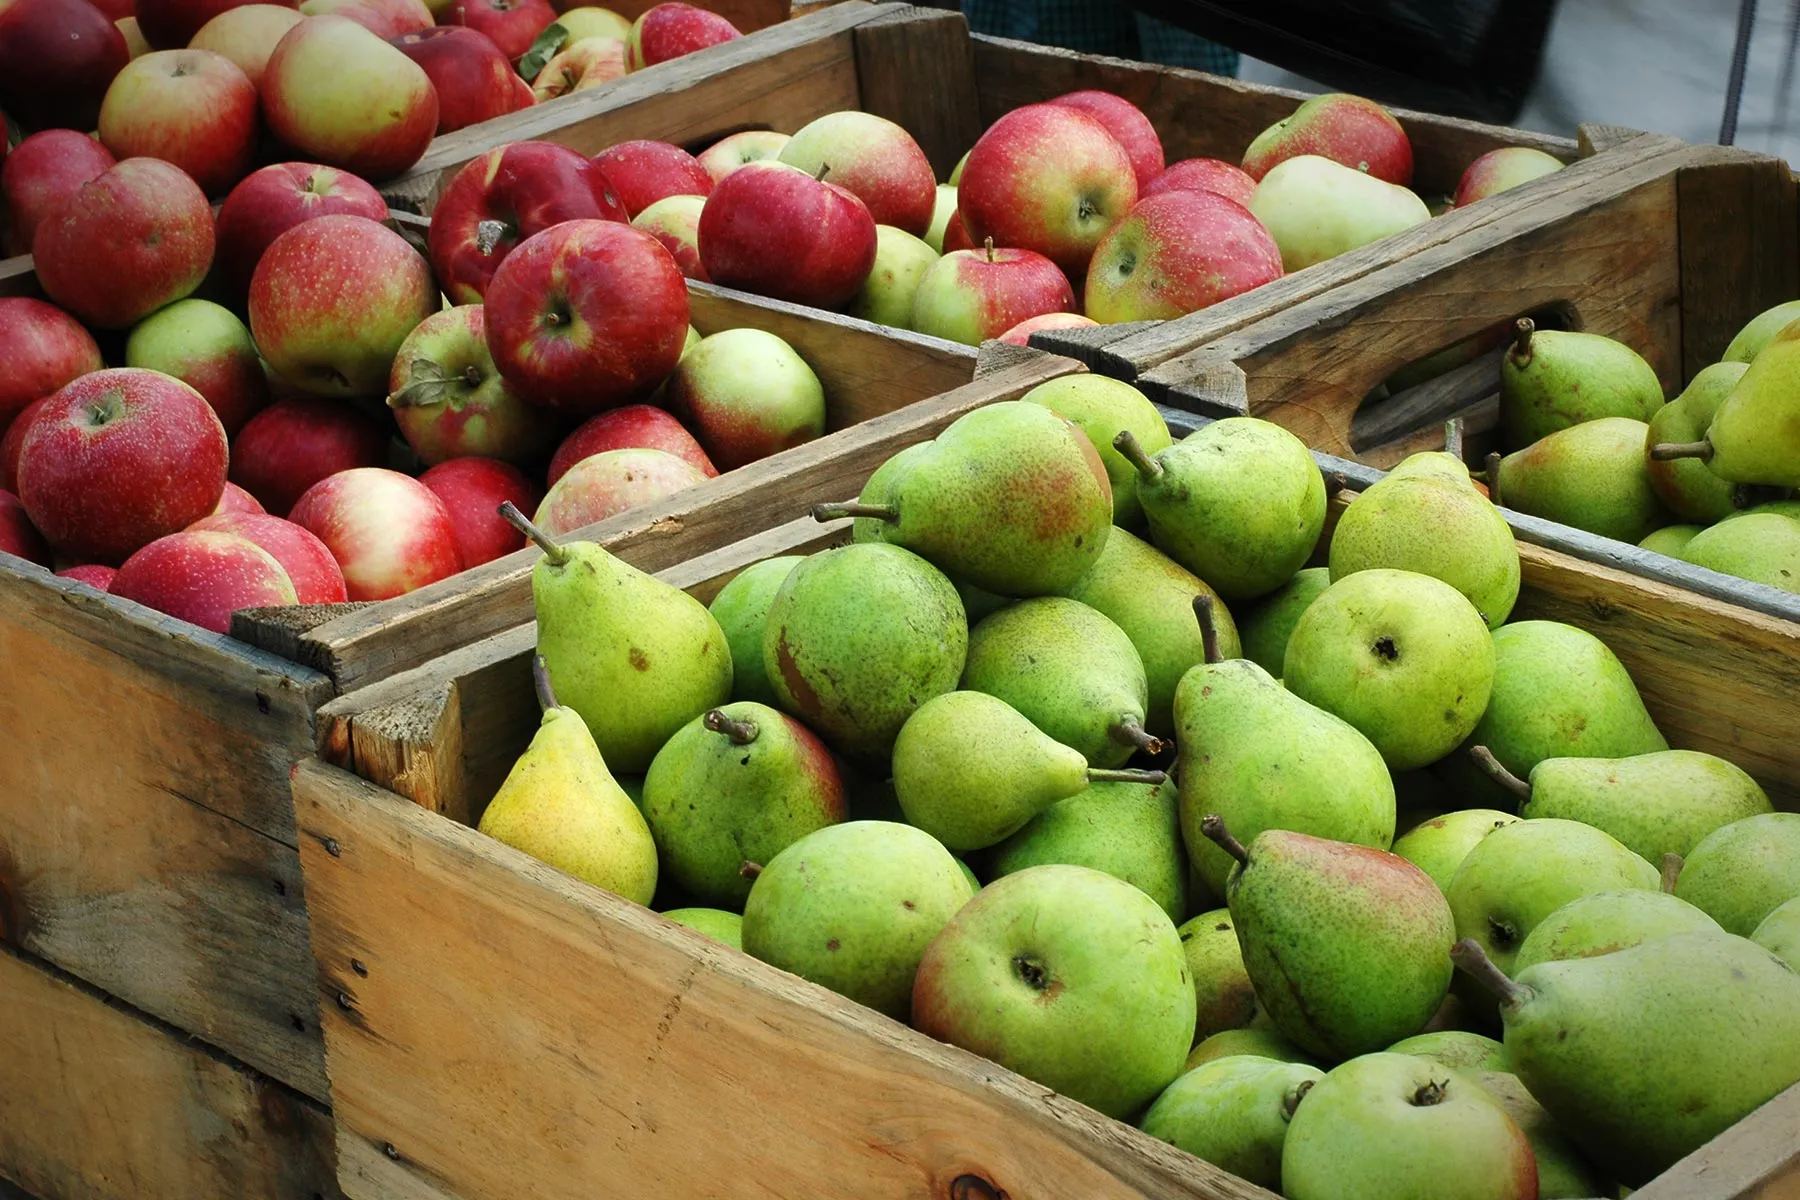 photo of apples and pears